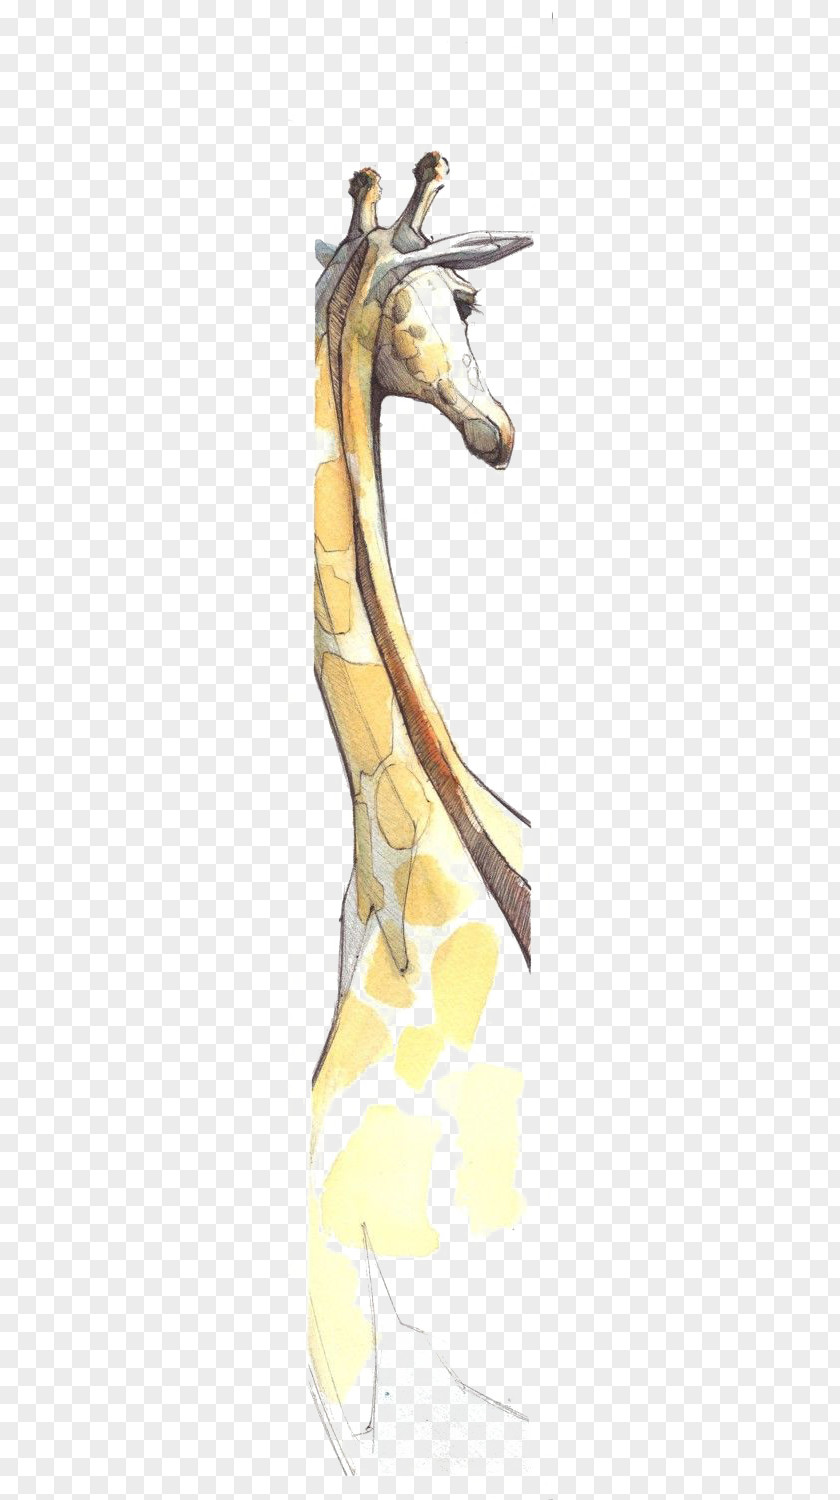 Hand-painted Giraffe Drawing Watercolor Painting Illustration PNG